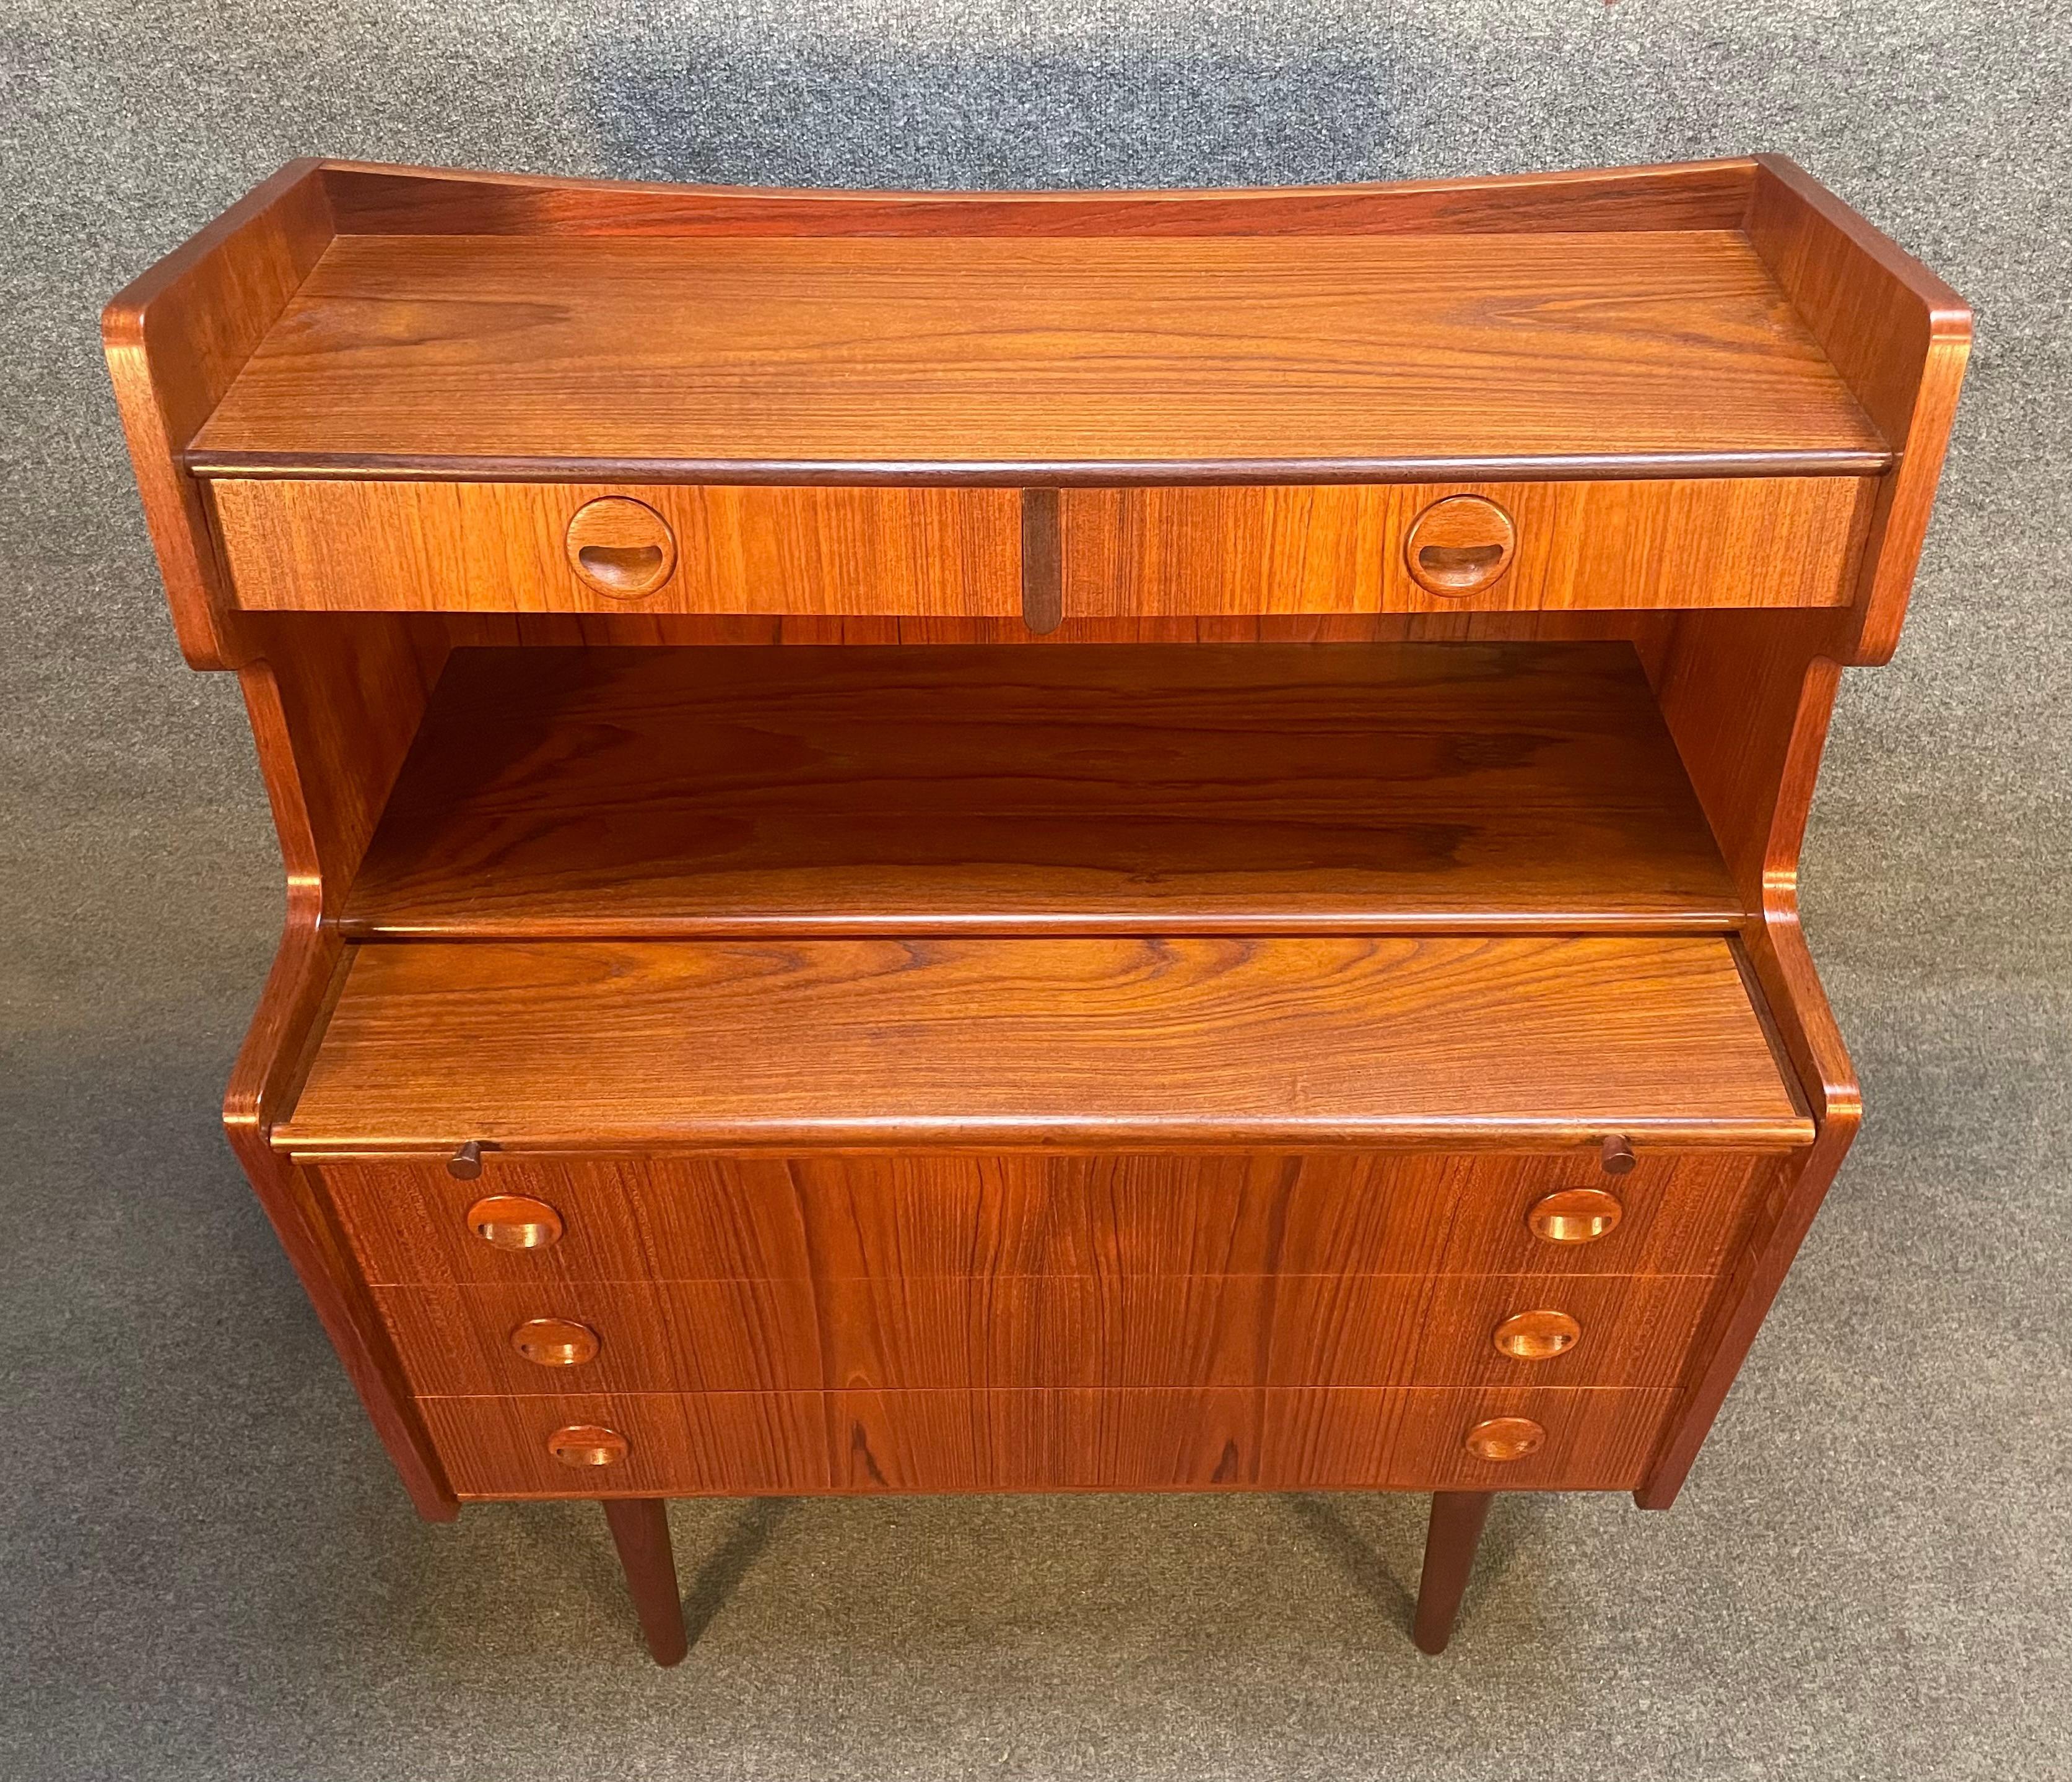 Here is a beautiful scandinavian modern secretary desk in teak wood manufactured in Denmark in the 1960's.
This lovely piece, recently imported from Europe to California before its refinishing, features a vibrant wood grain, two small drawers on